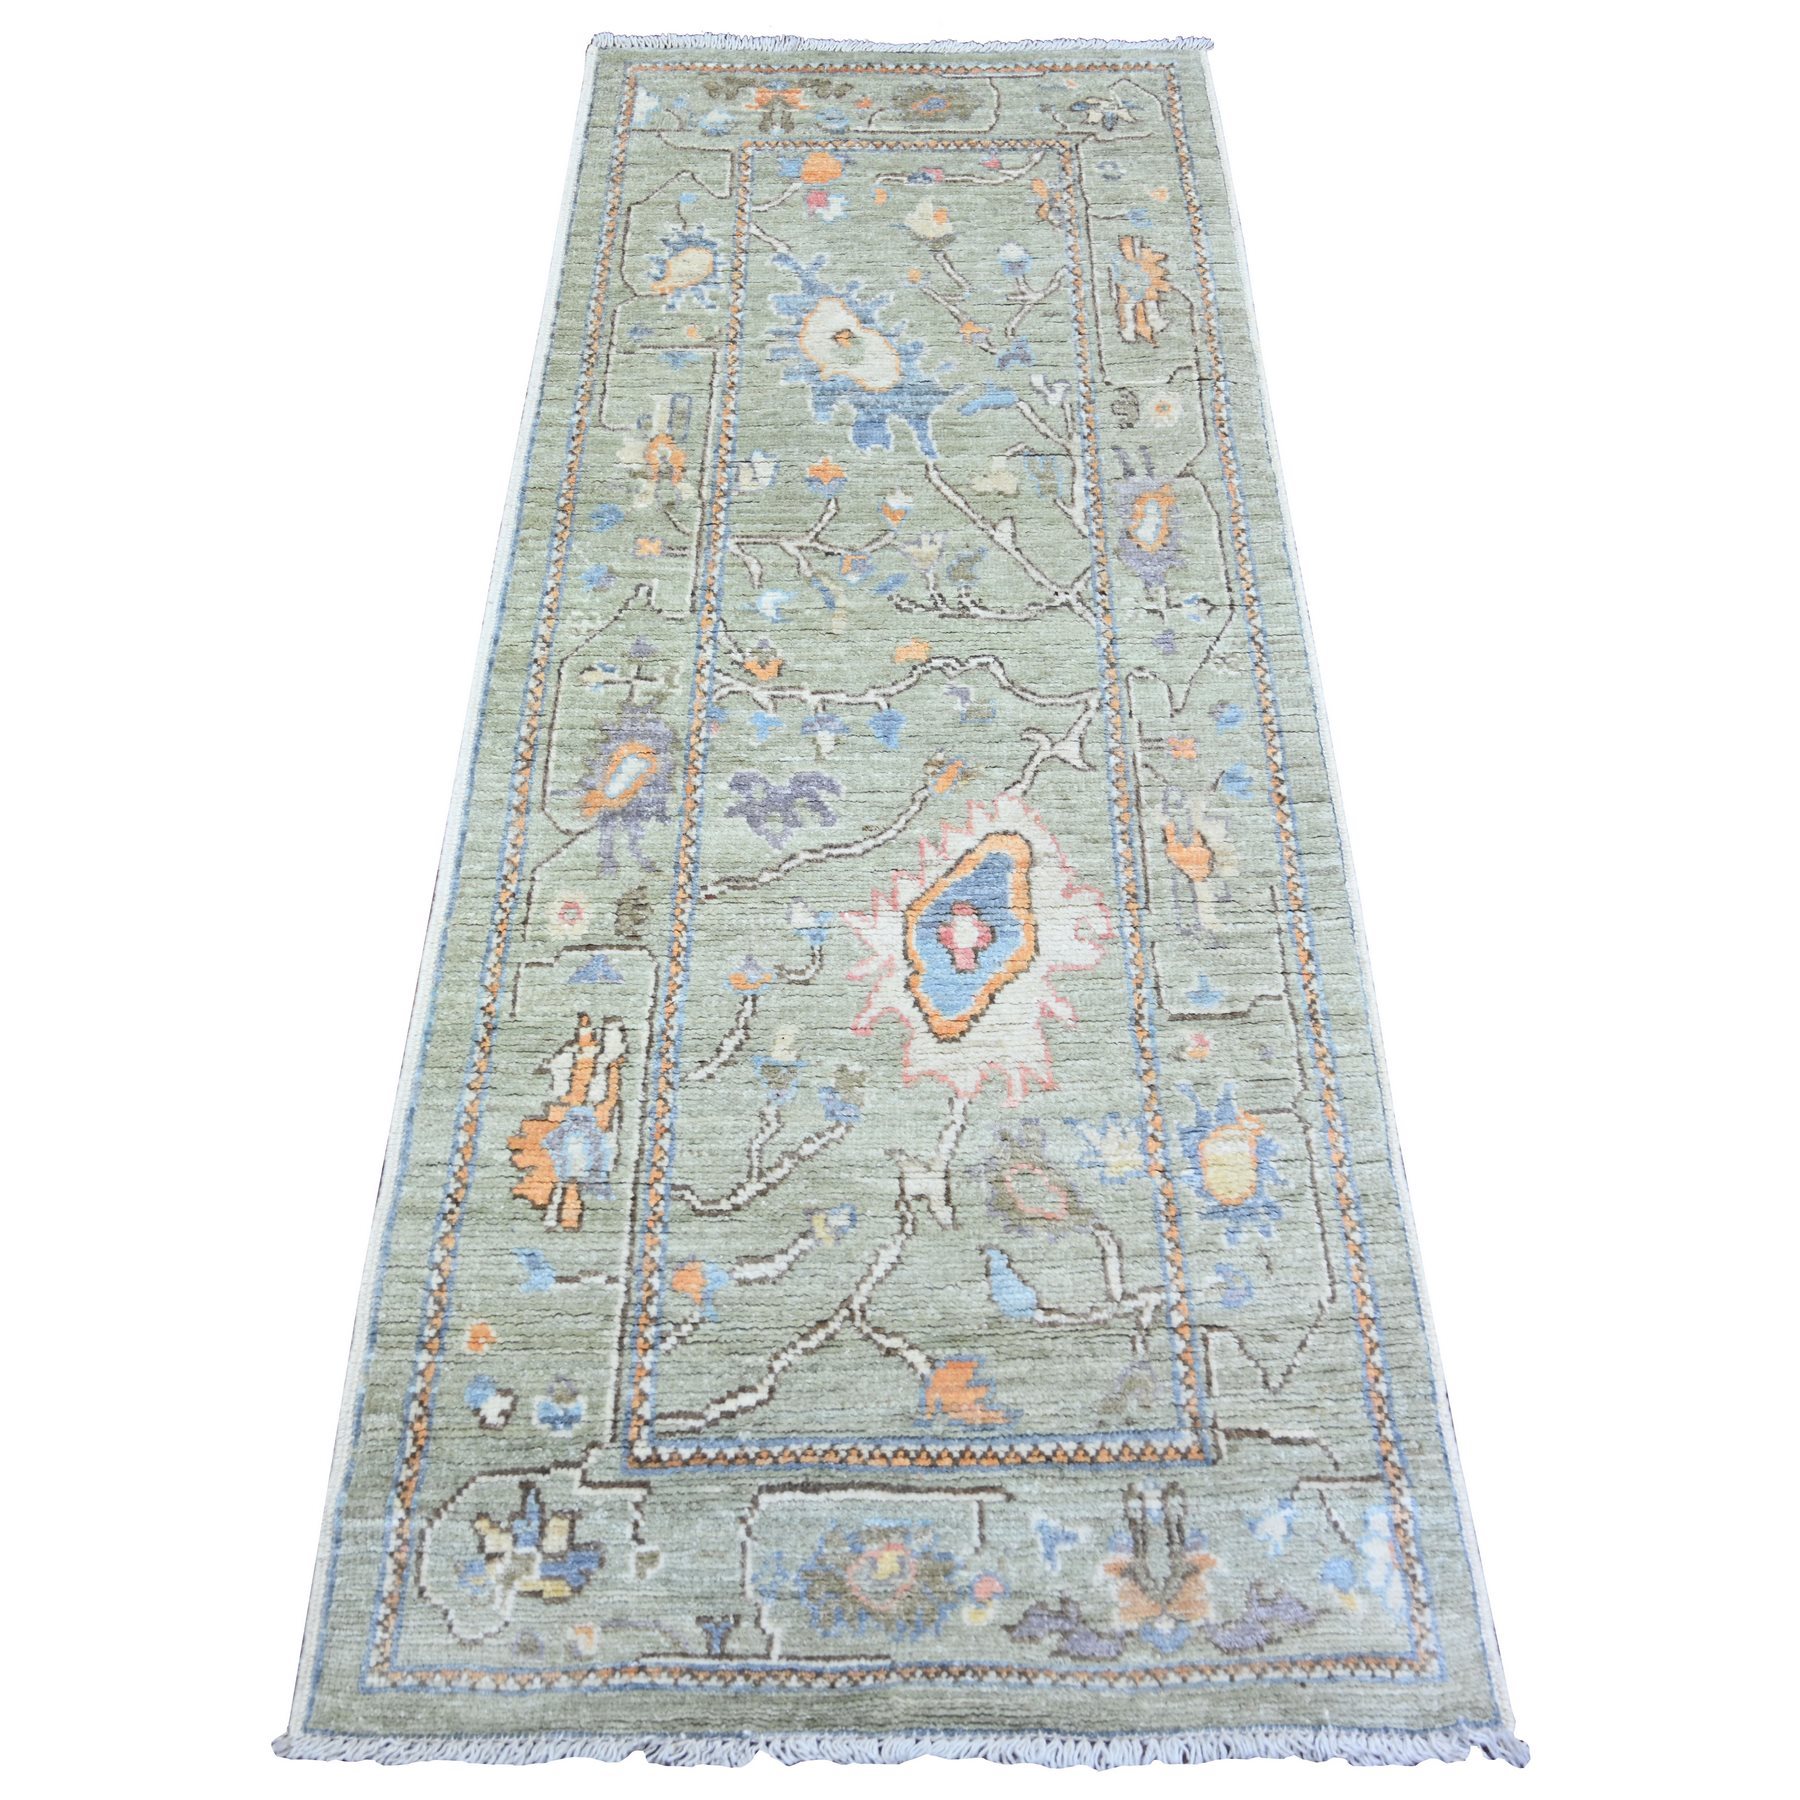 2'6"x6' Laurel Green, Vegetable Dyes Soft Wool, Hand Woven Afghan Angora Oushak with Vines and Floral Motifs, Runner Oriental Rug 